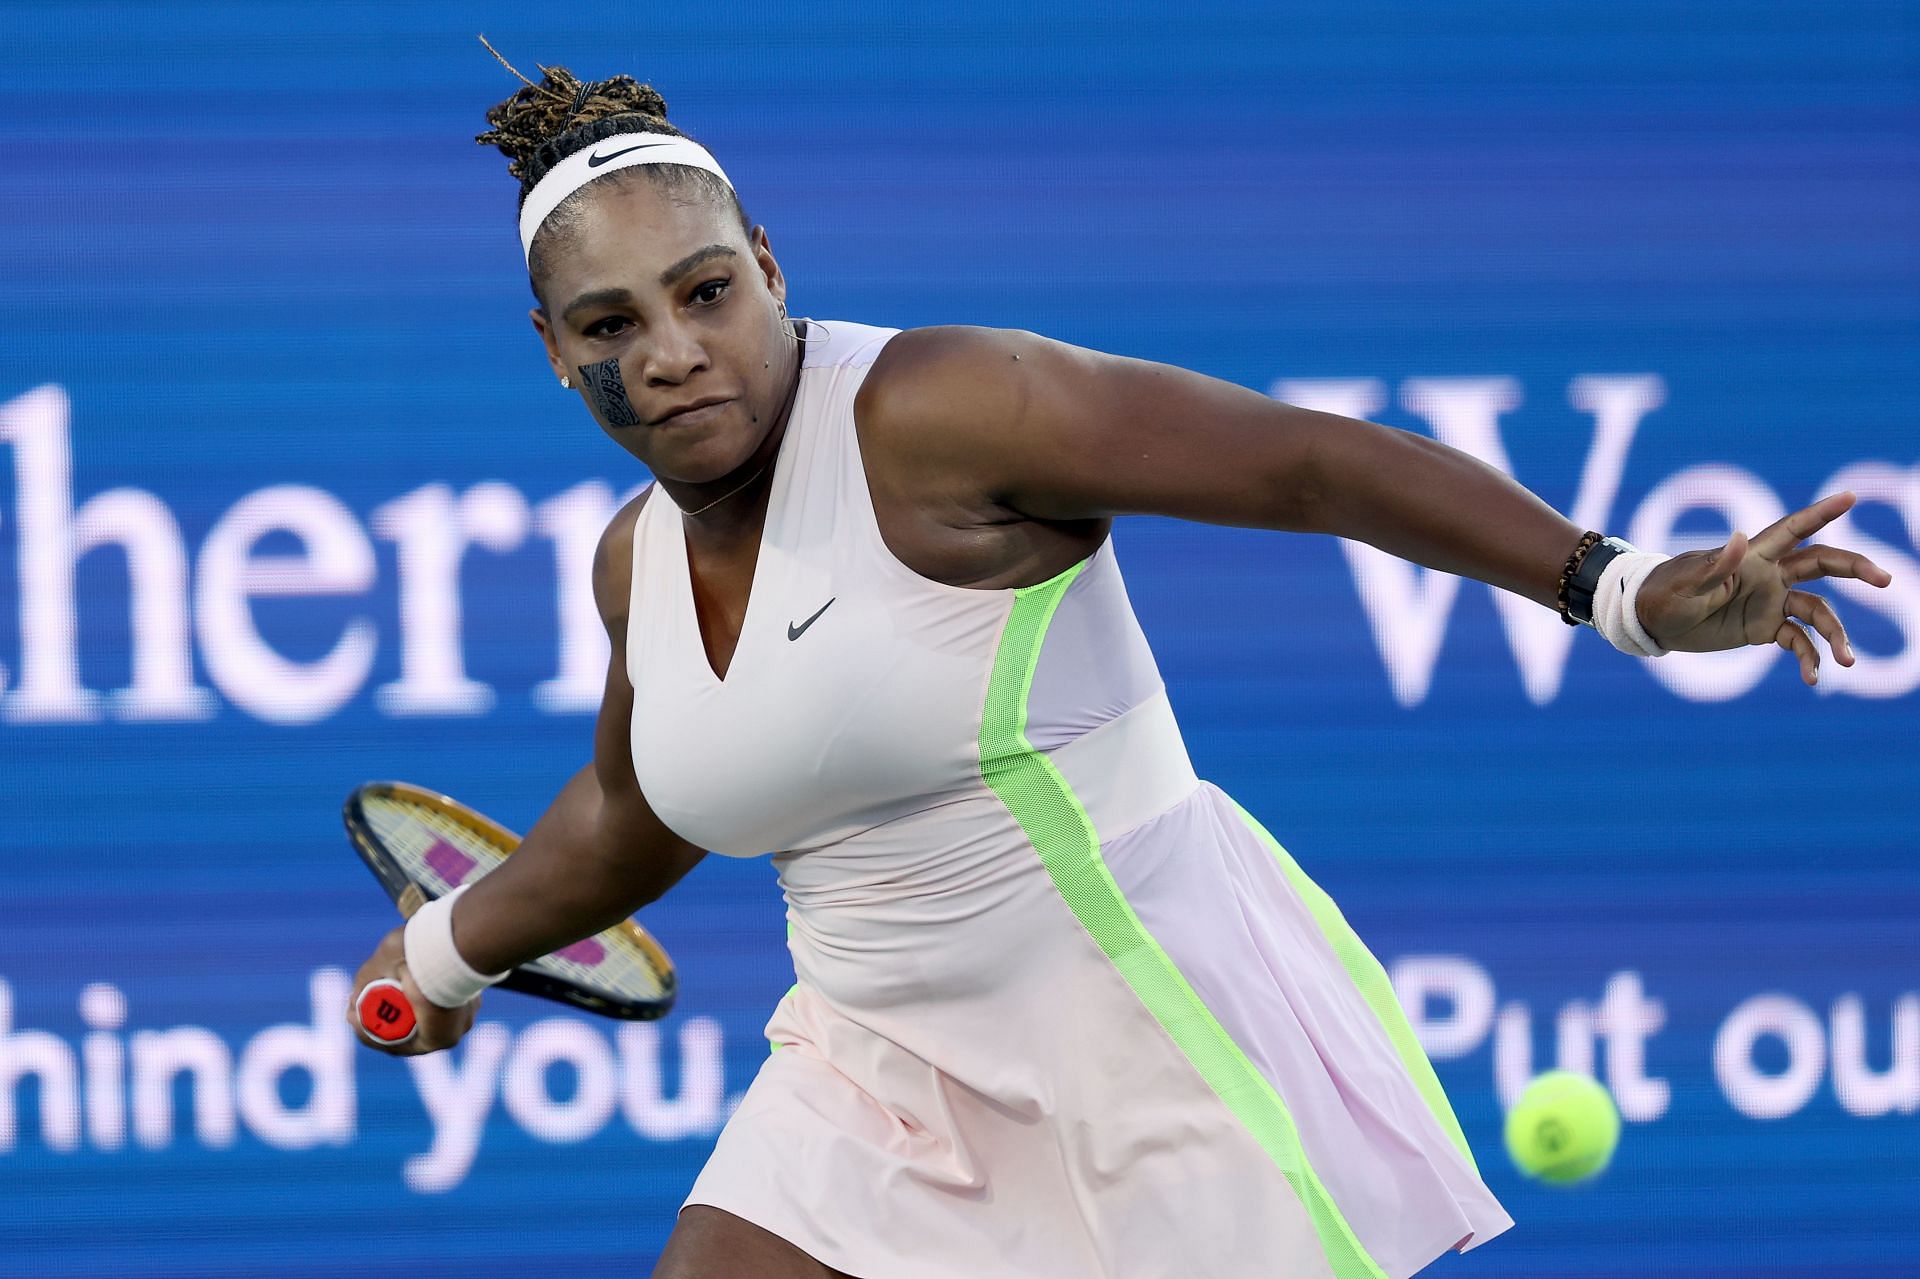 Serena Williams has won the US Open six times.